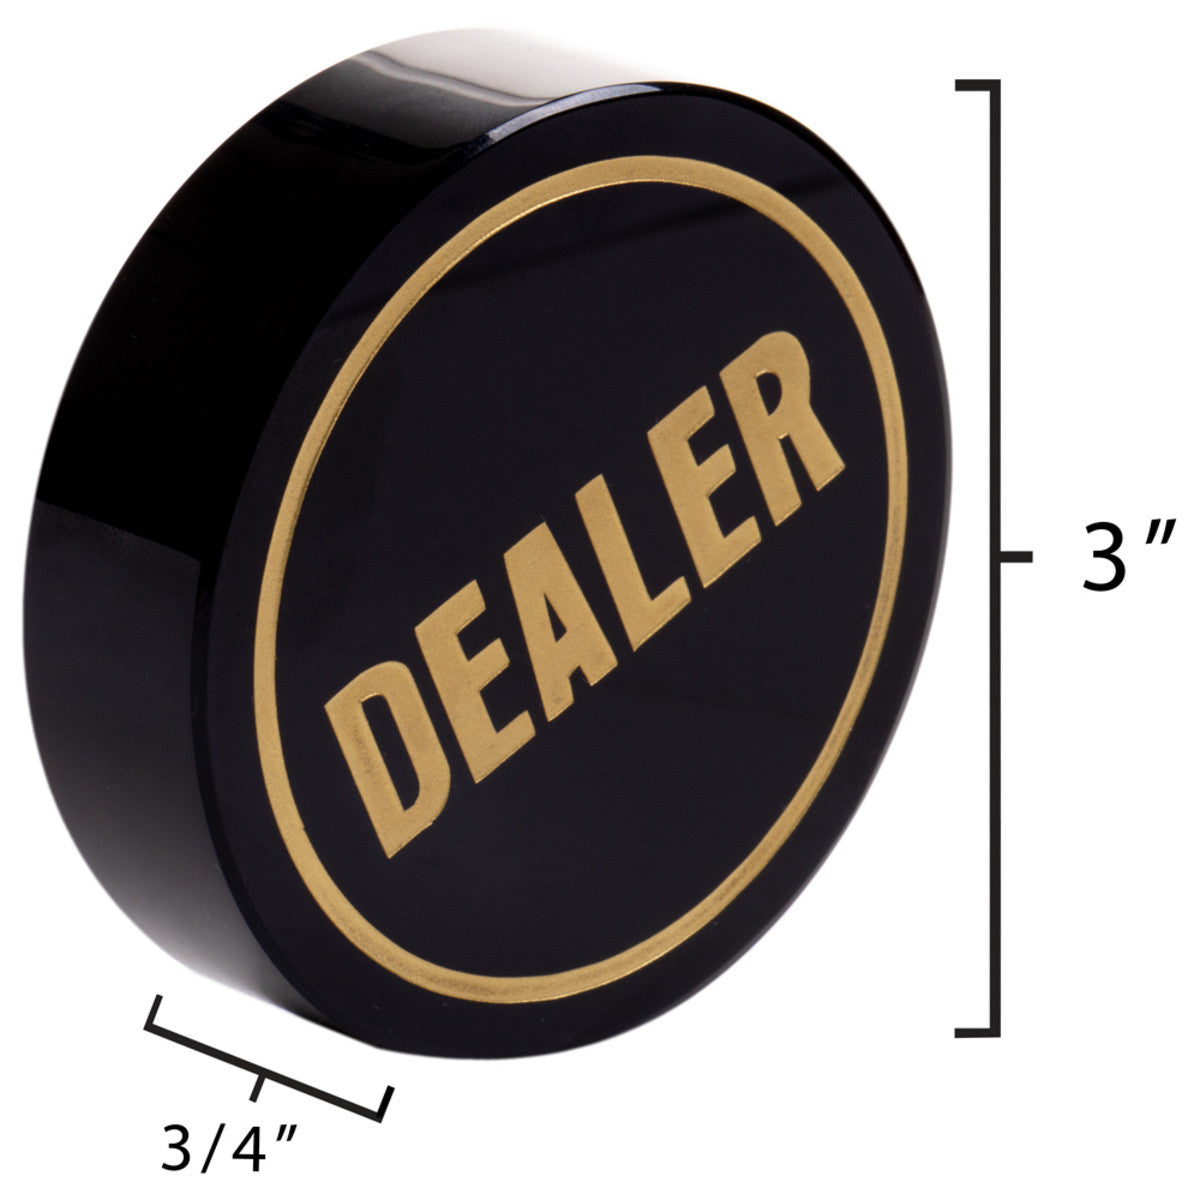 Black and Gold Dealer Button